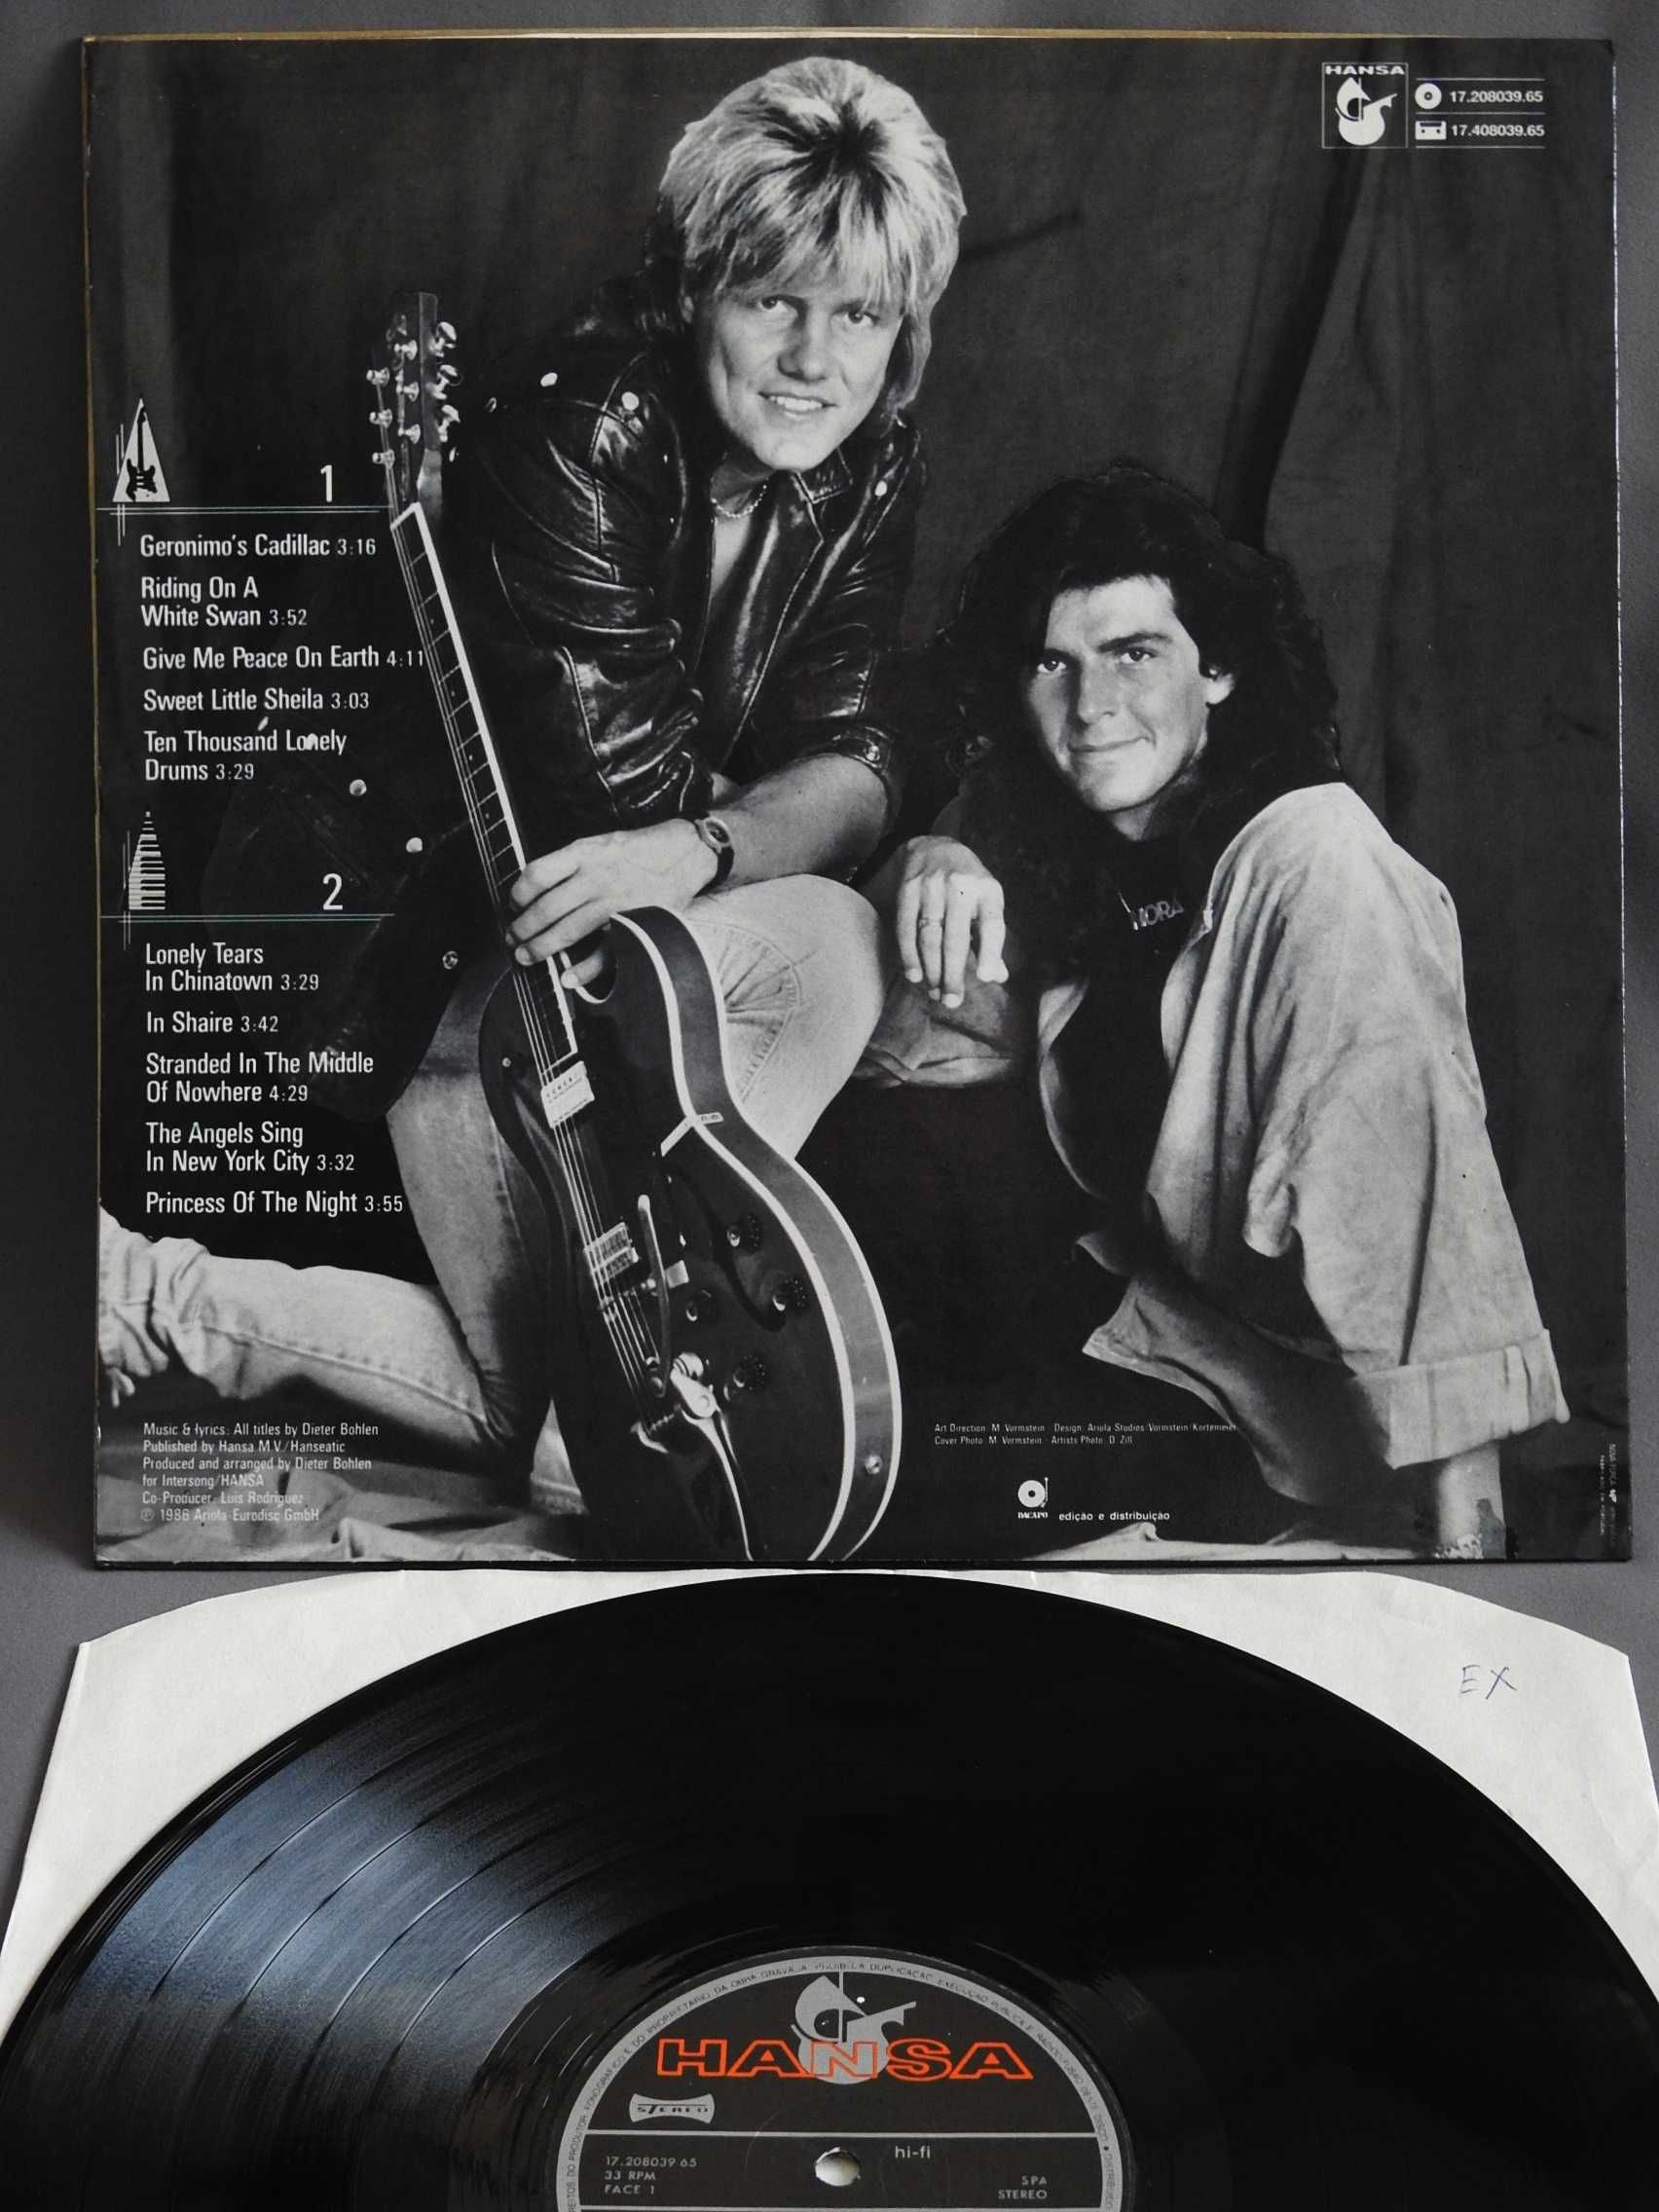 Modern Talking In The Middle Of Nowhere LP 1986 Португалия пластинка